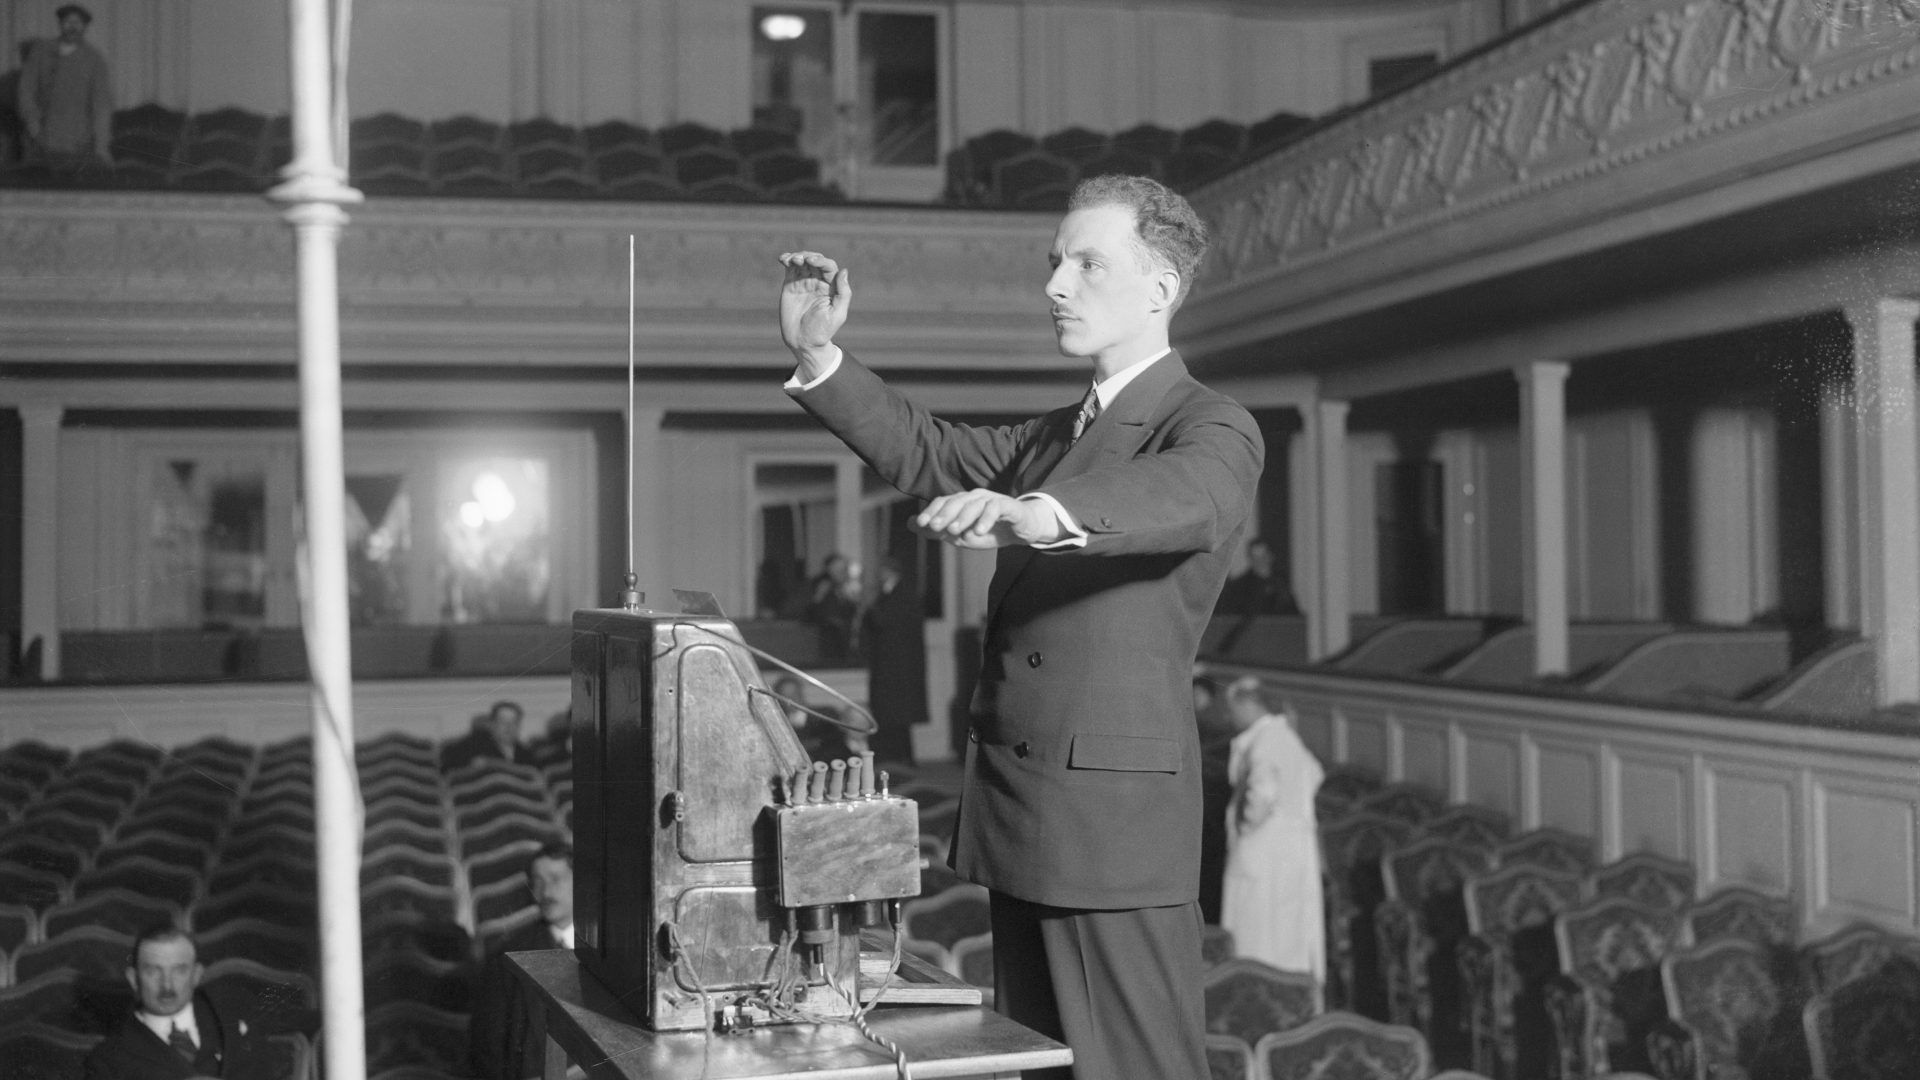 Professor Leon Theremin demonstrating his electronic musical instrument in Paris, 
December 1927. Photo: Bettmann/Getty